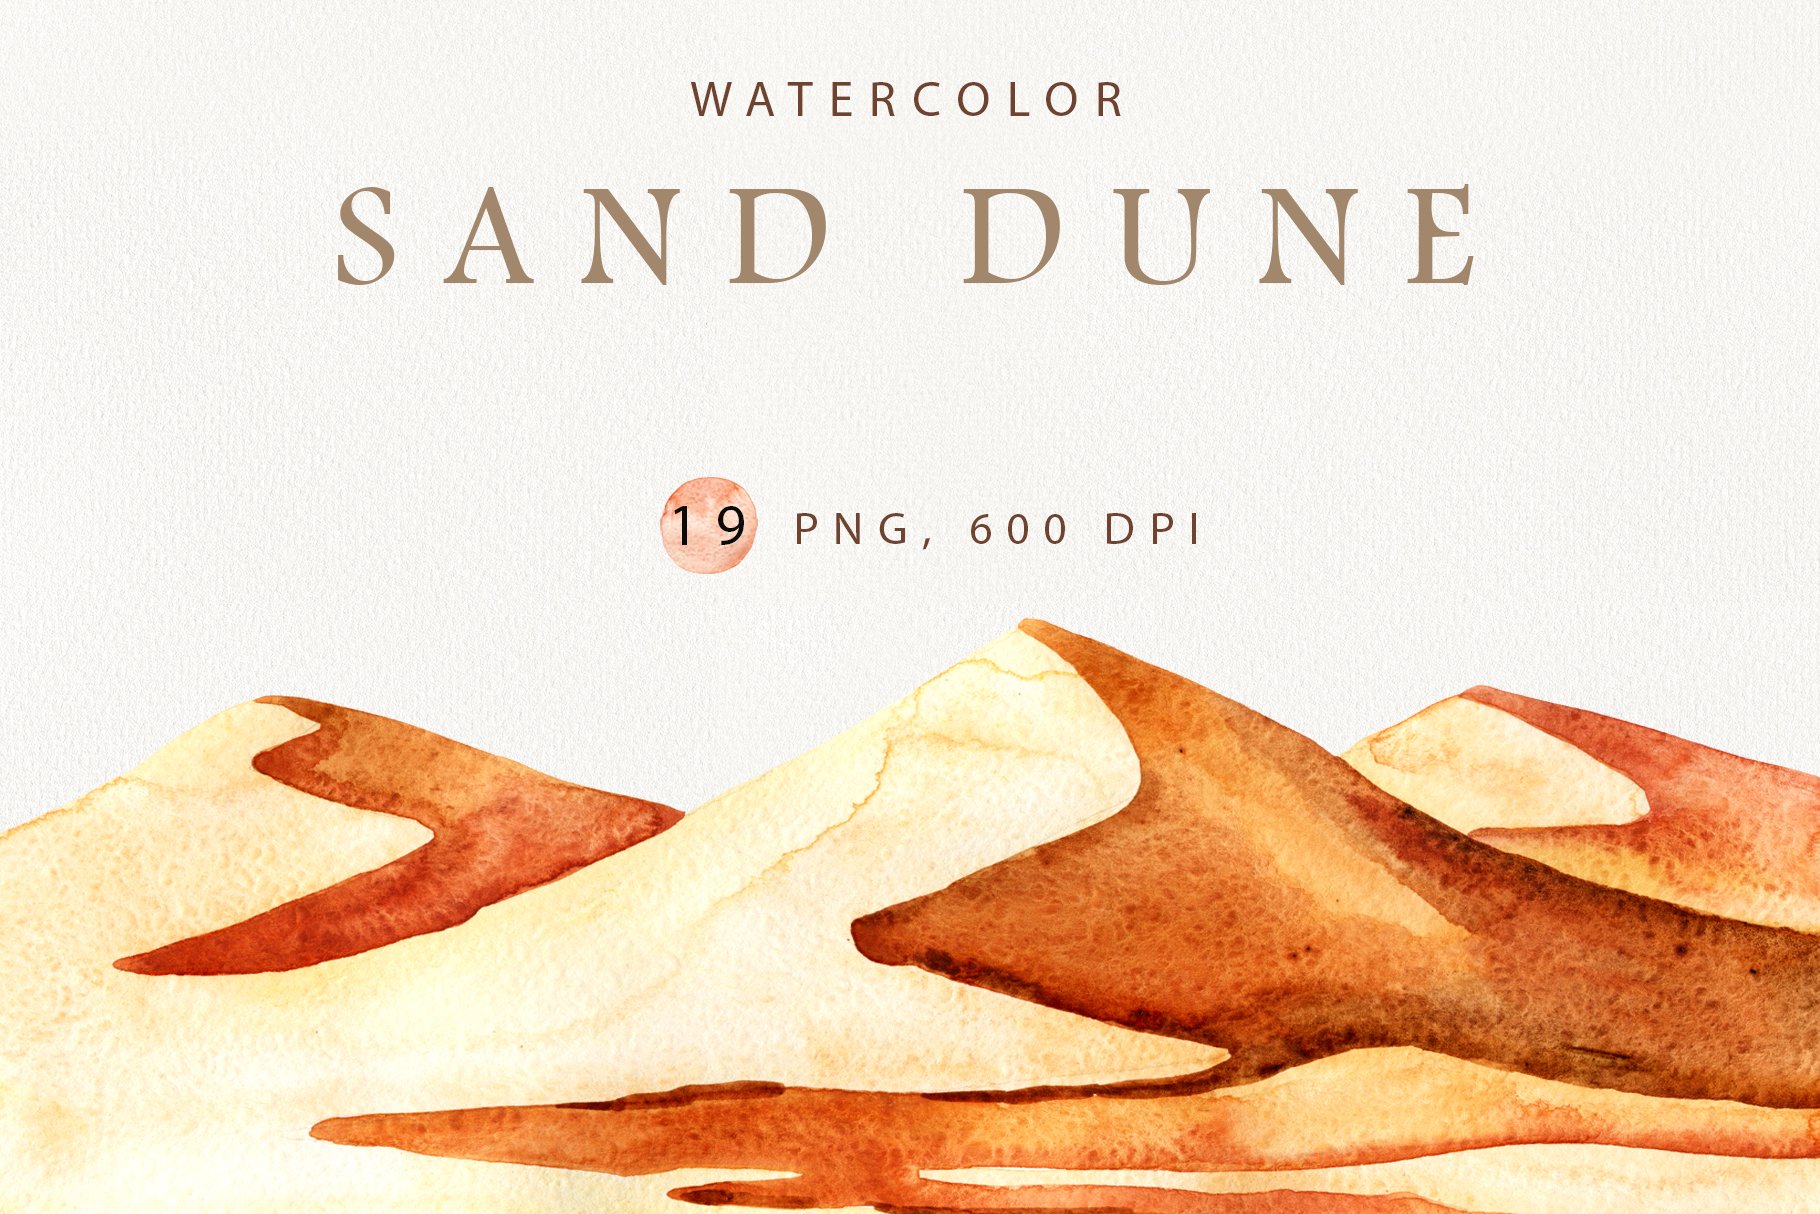 Watercolor sand dune clip art cover image.